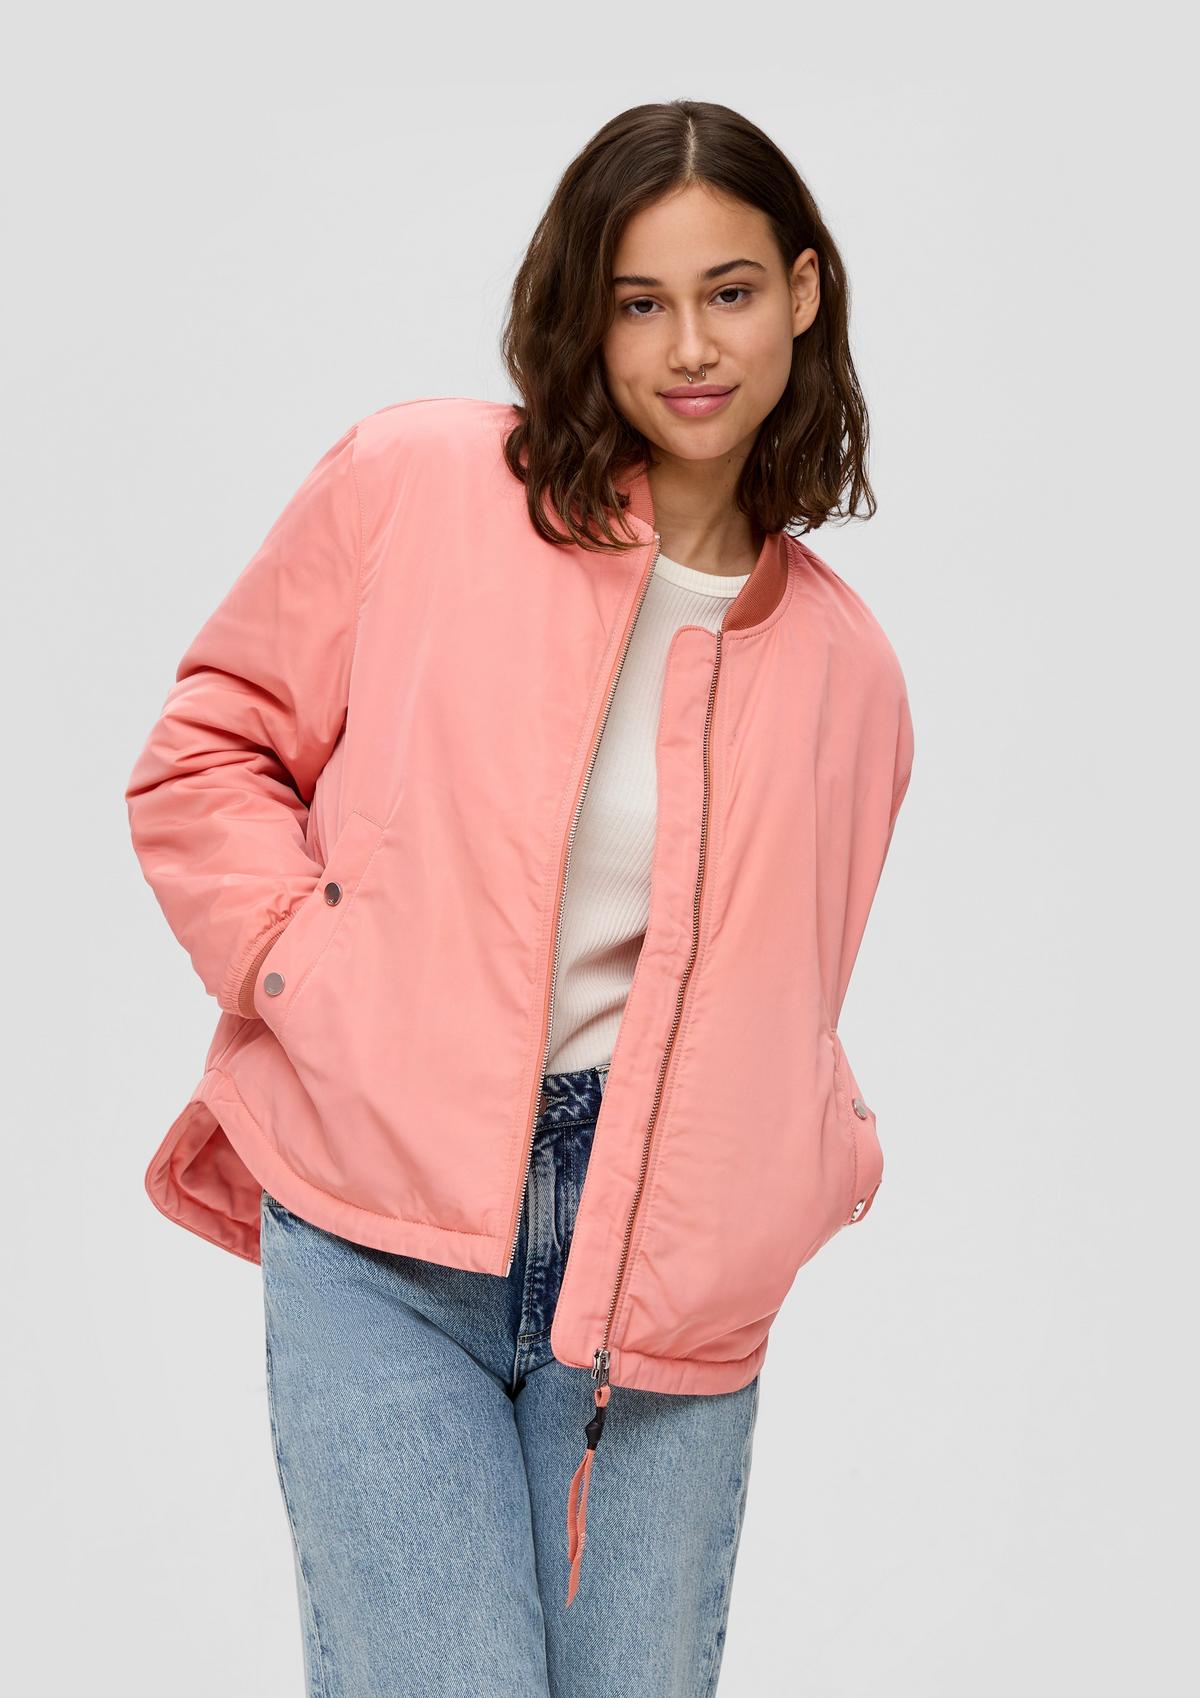 Bomber jacket with a stand-up collar